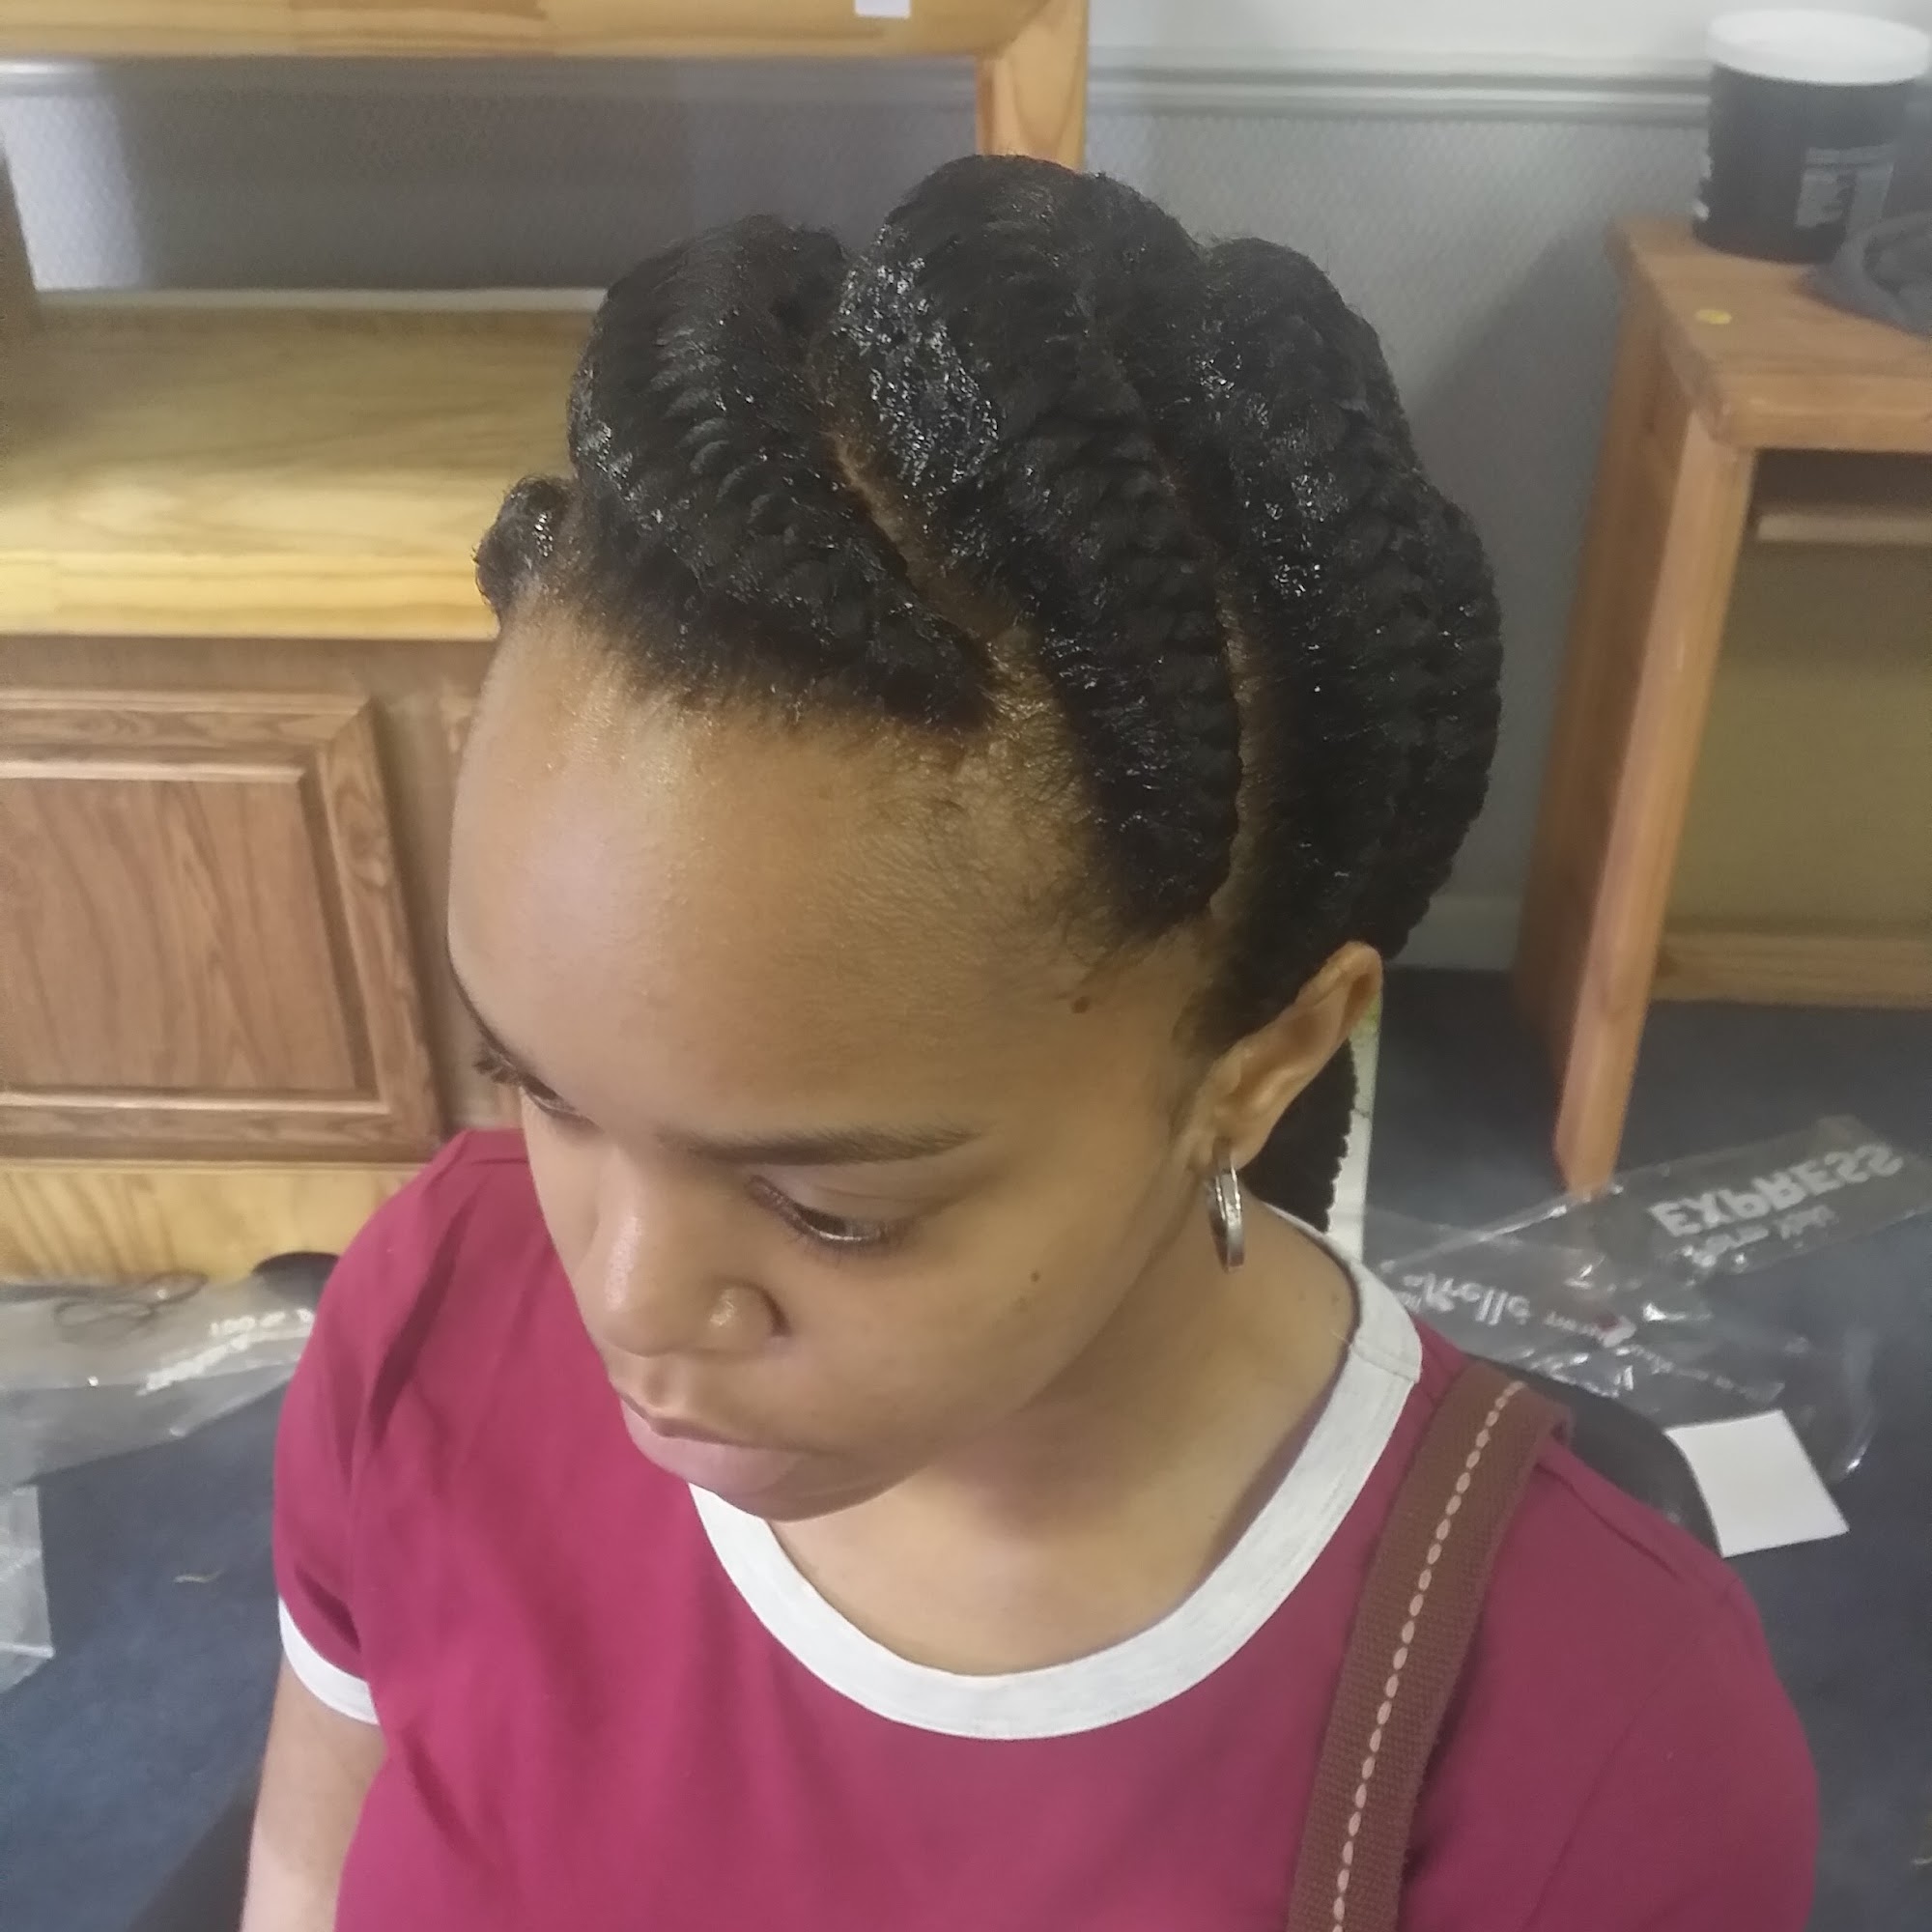 Betty African Hair Braiding 1904 Leflore Ave, Greenwood Mississippi 38930